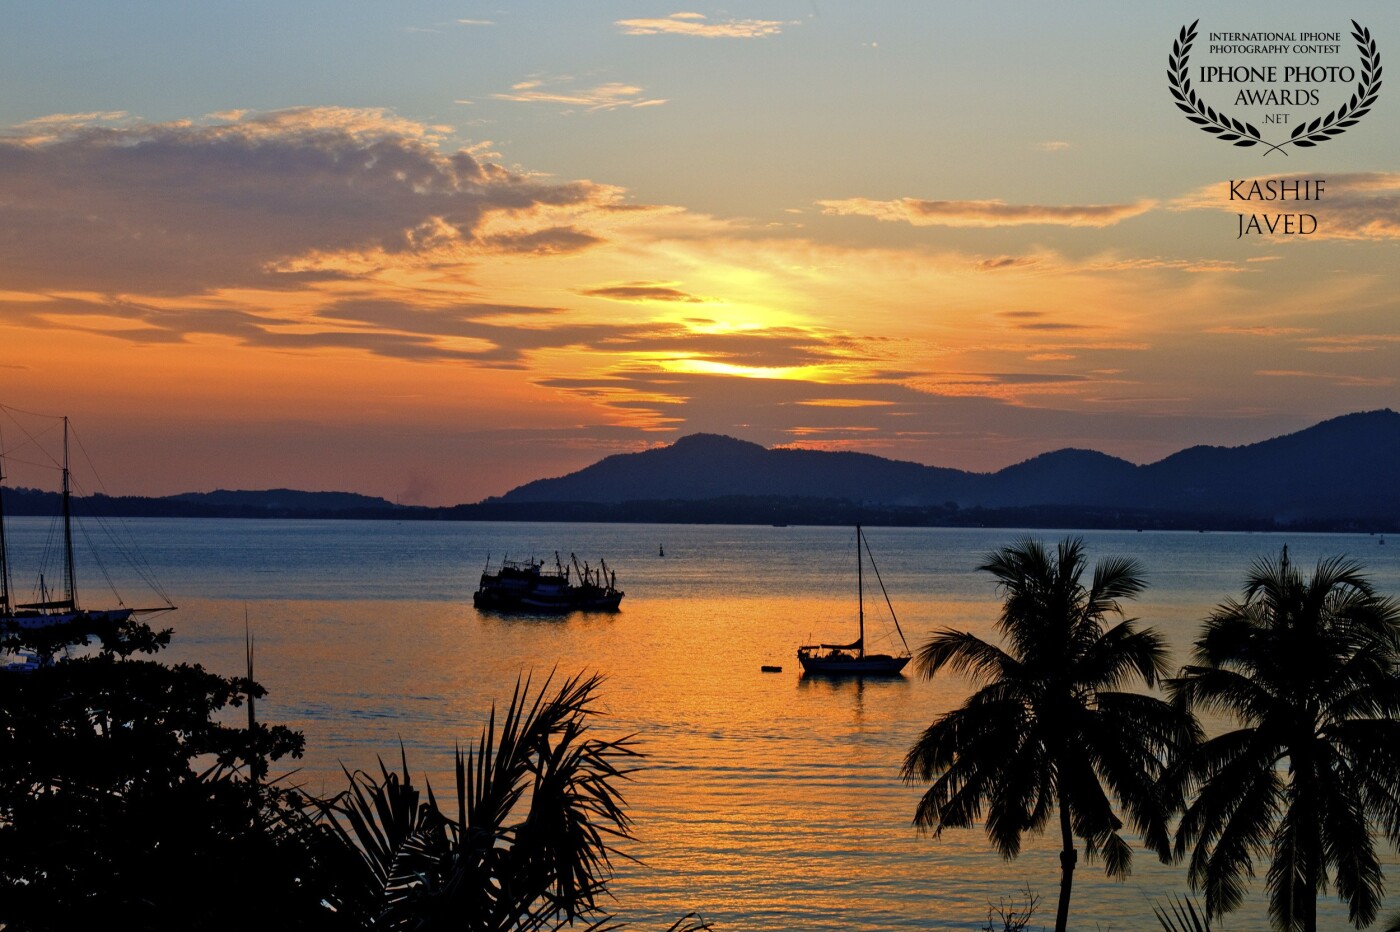 I took this photo at Phuket – Thailand, this spectacular view from resort balcony was just waiting to be captured. I still remember checking into the room, opening the balcony door first thing and scrambling to capture this beautiful sunset<br />
<br />
‘There are some things you learn best in calm, and some in a storm.’ – Willa Cather